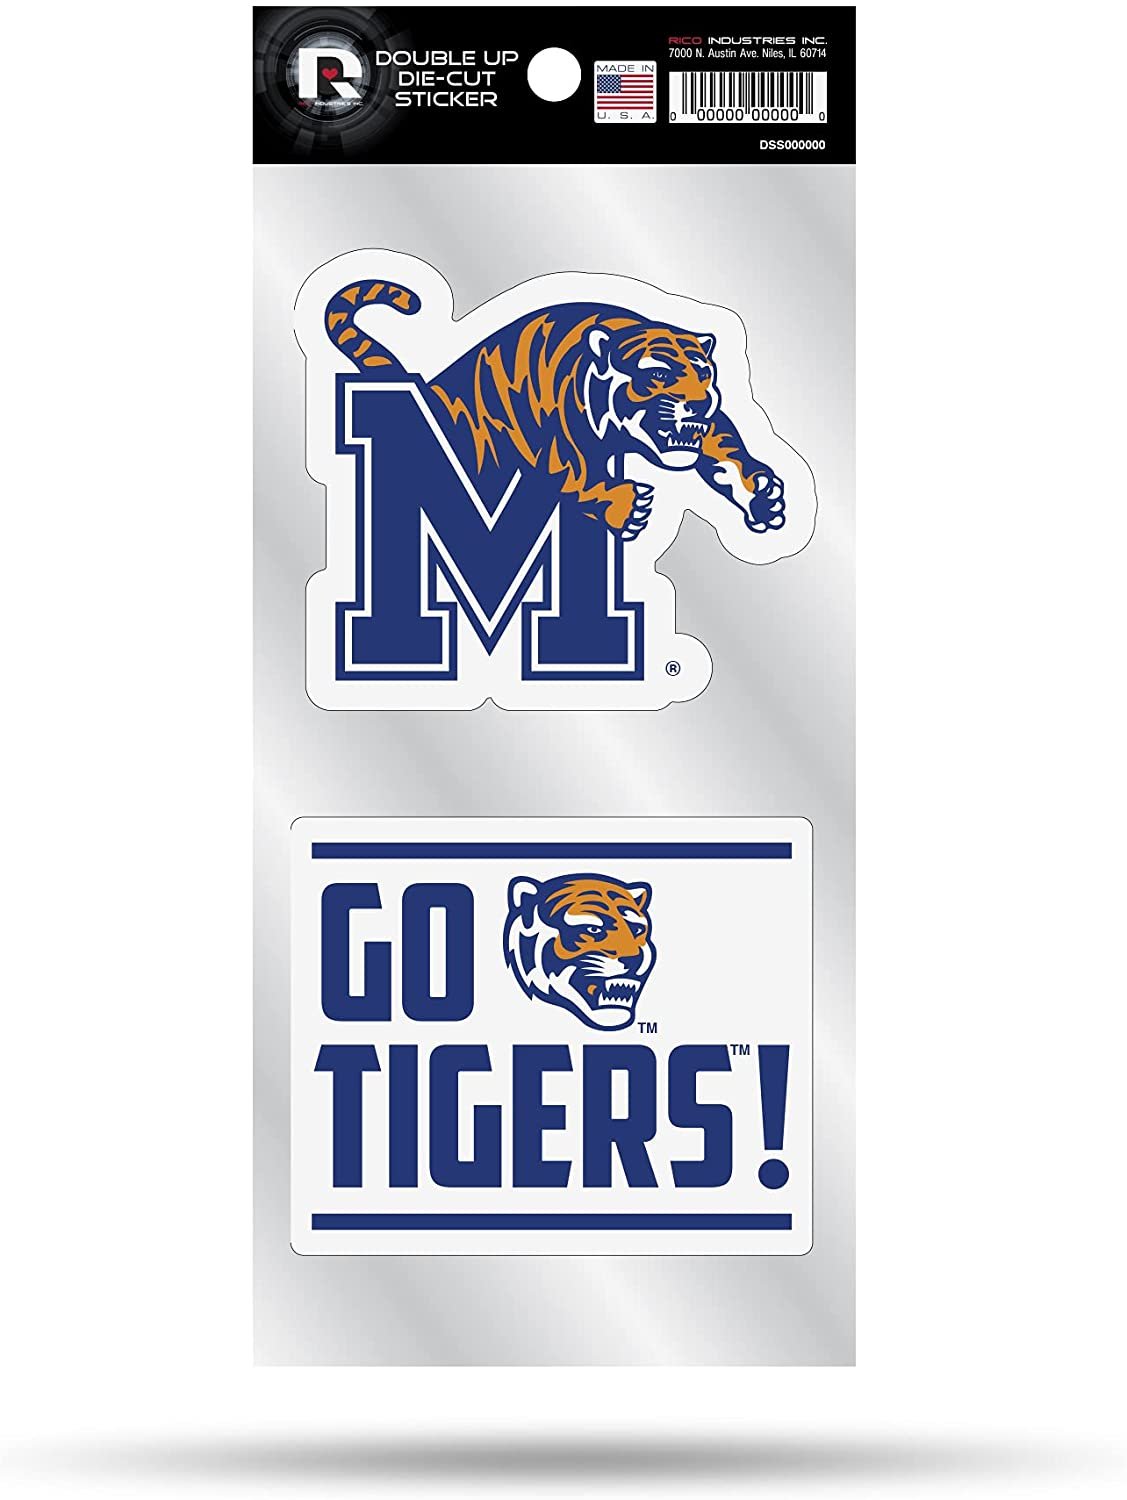 University of Memphis Tigers 2-Piece Double Up Die Cut Sticker Decal Sheet, 4x8 Inch